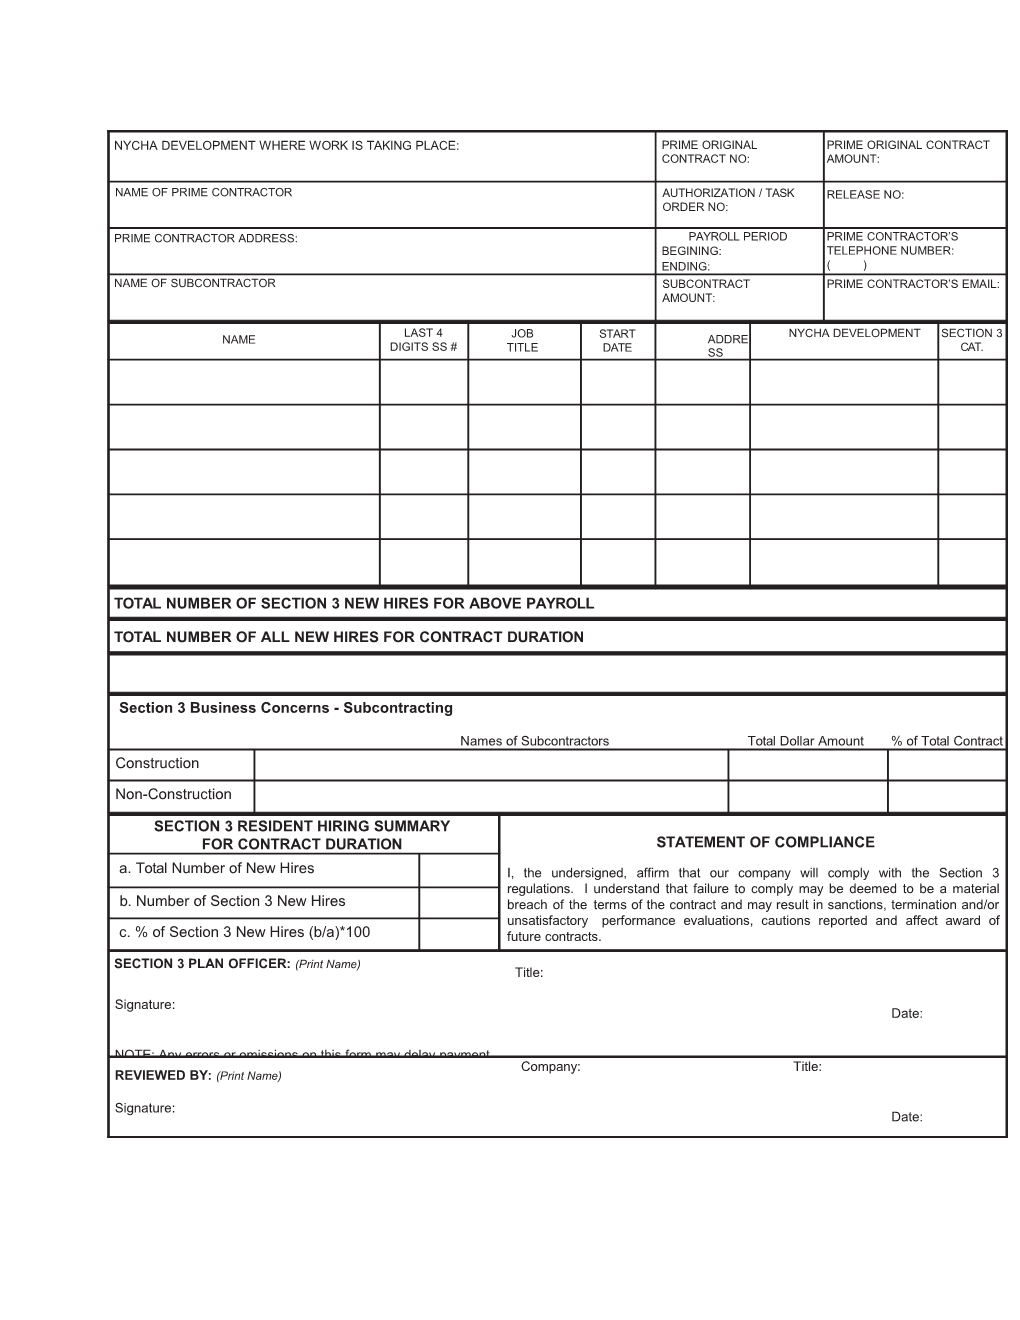 Contractors Are Requiredto Completethis Form in Its Entirety